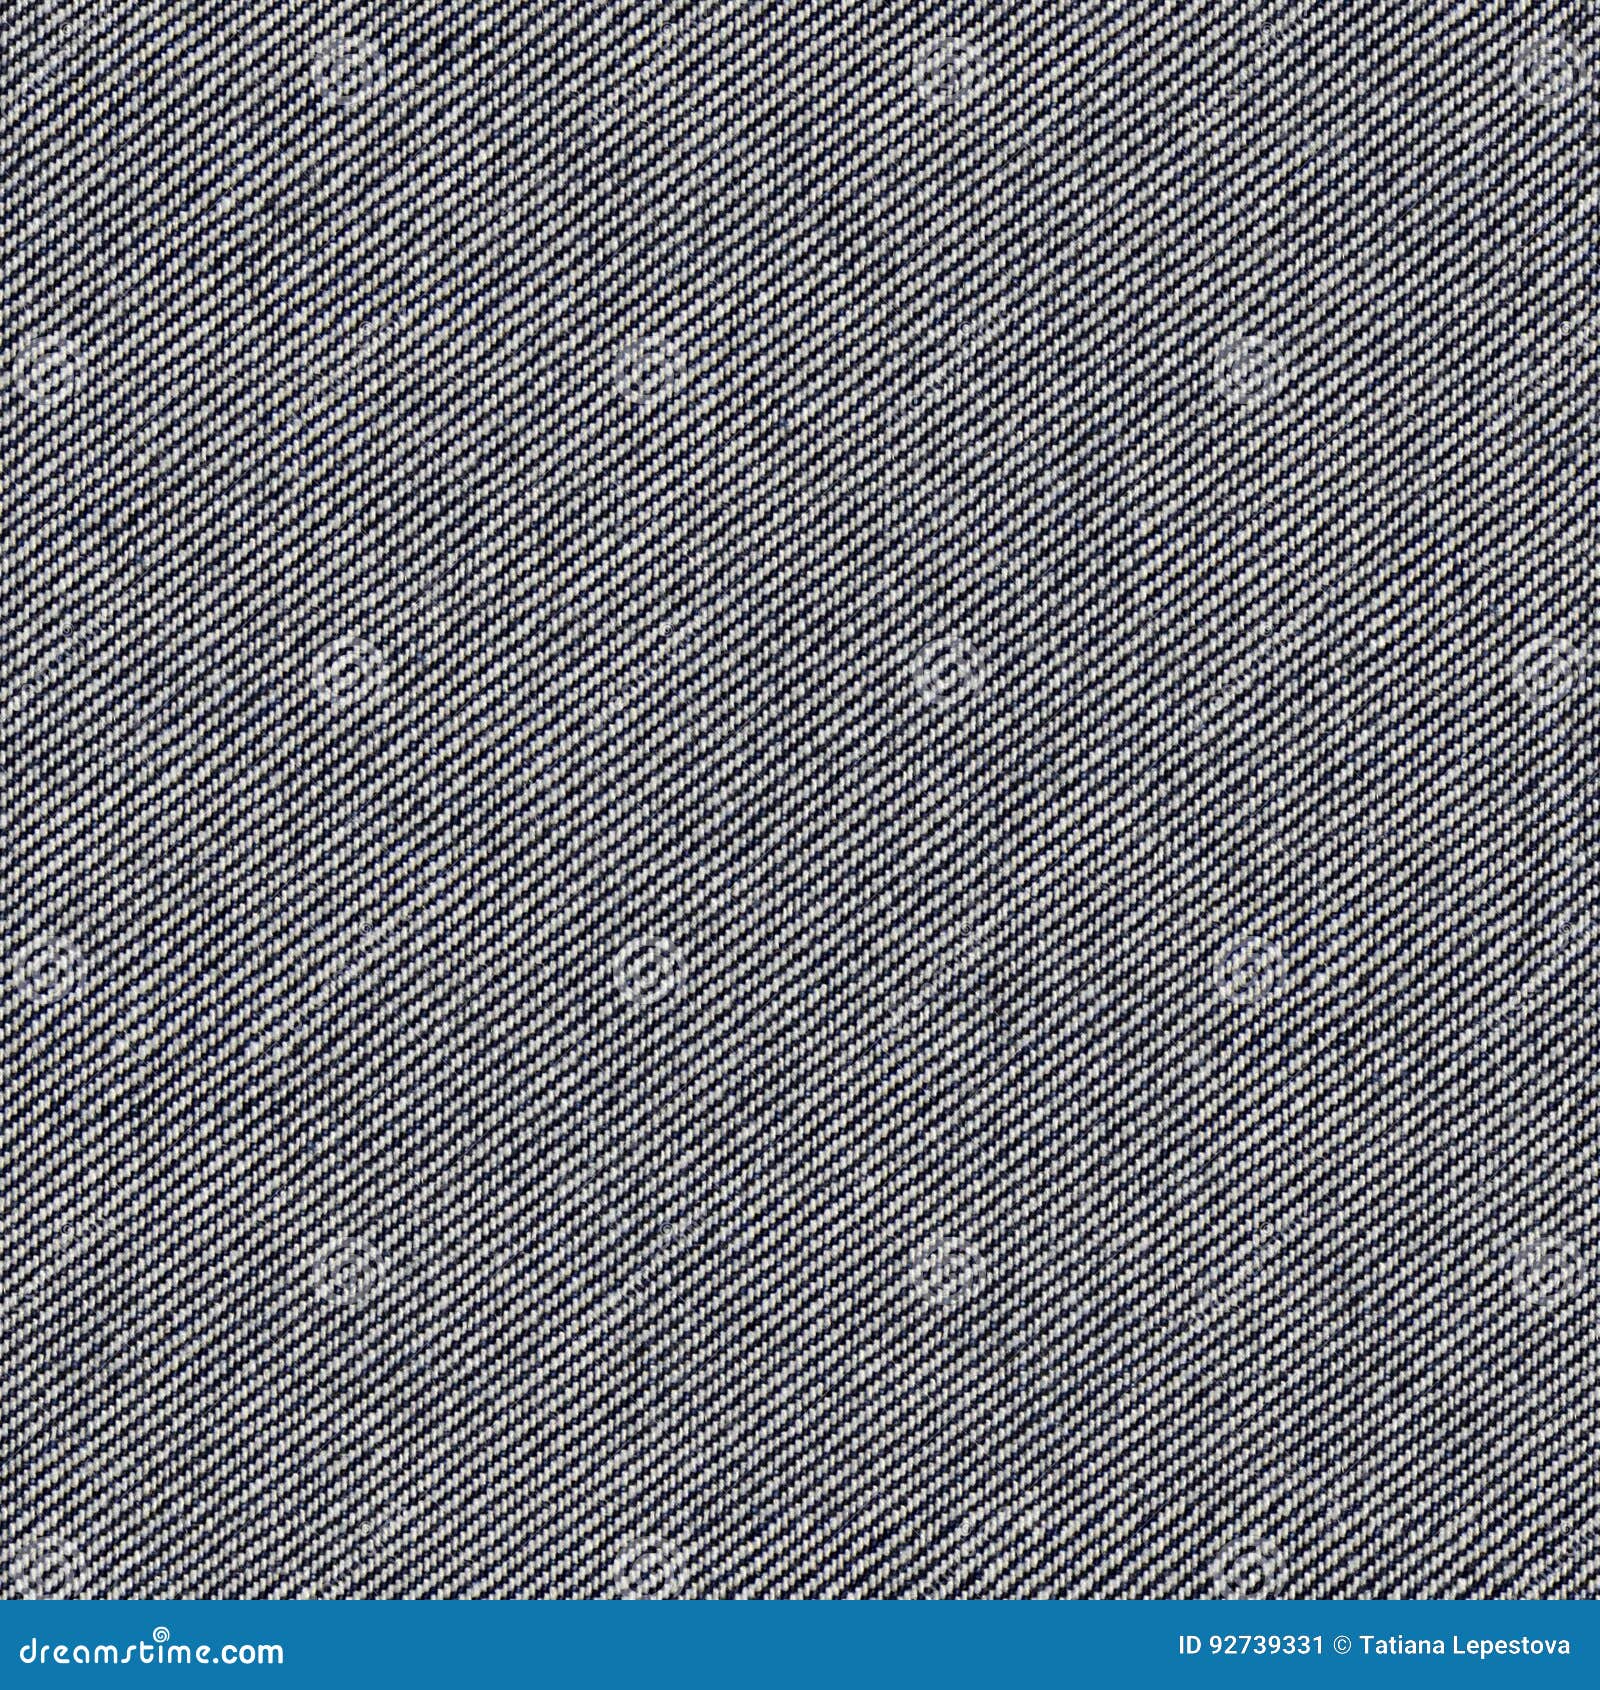 fabric texture 4 diffuse seamless map. jeans material.